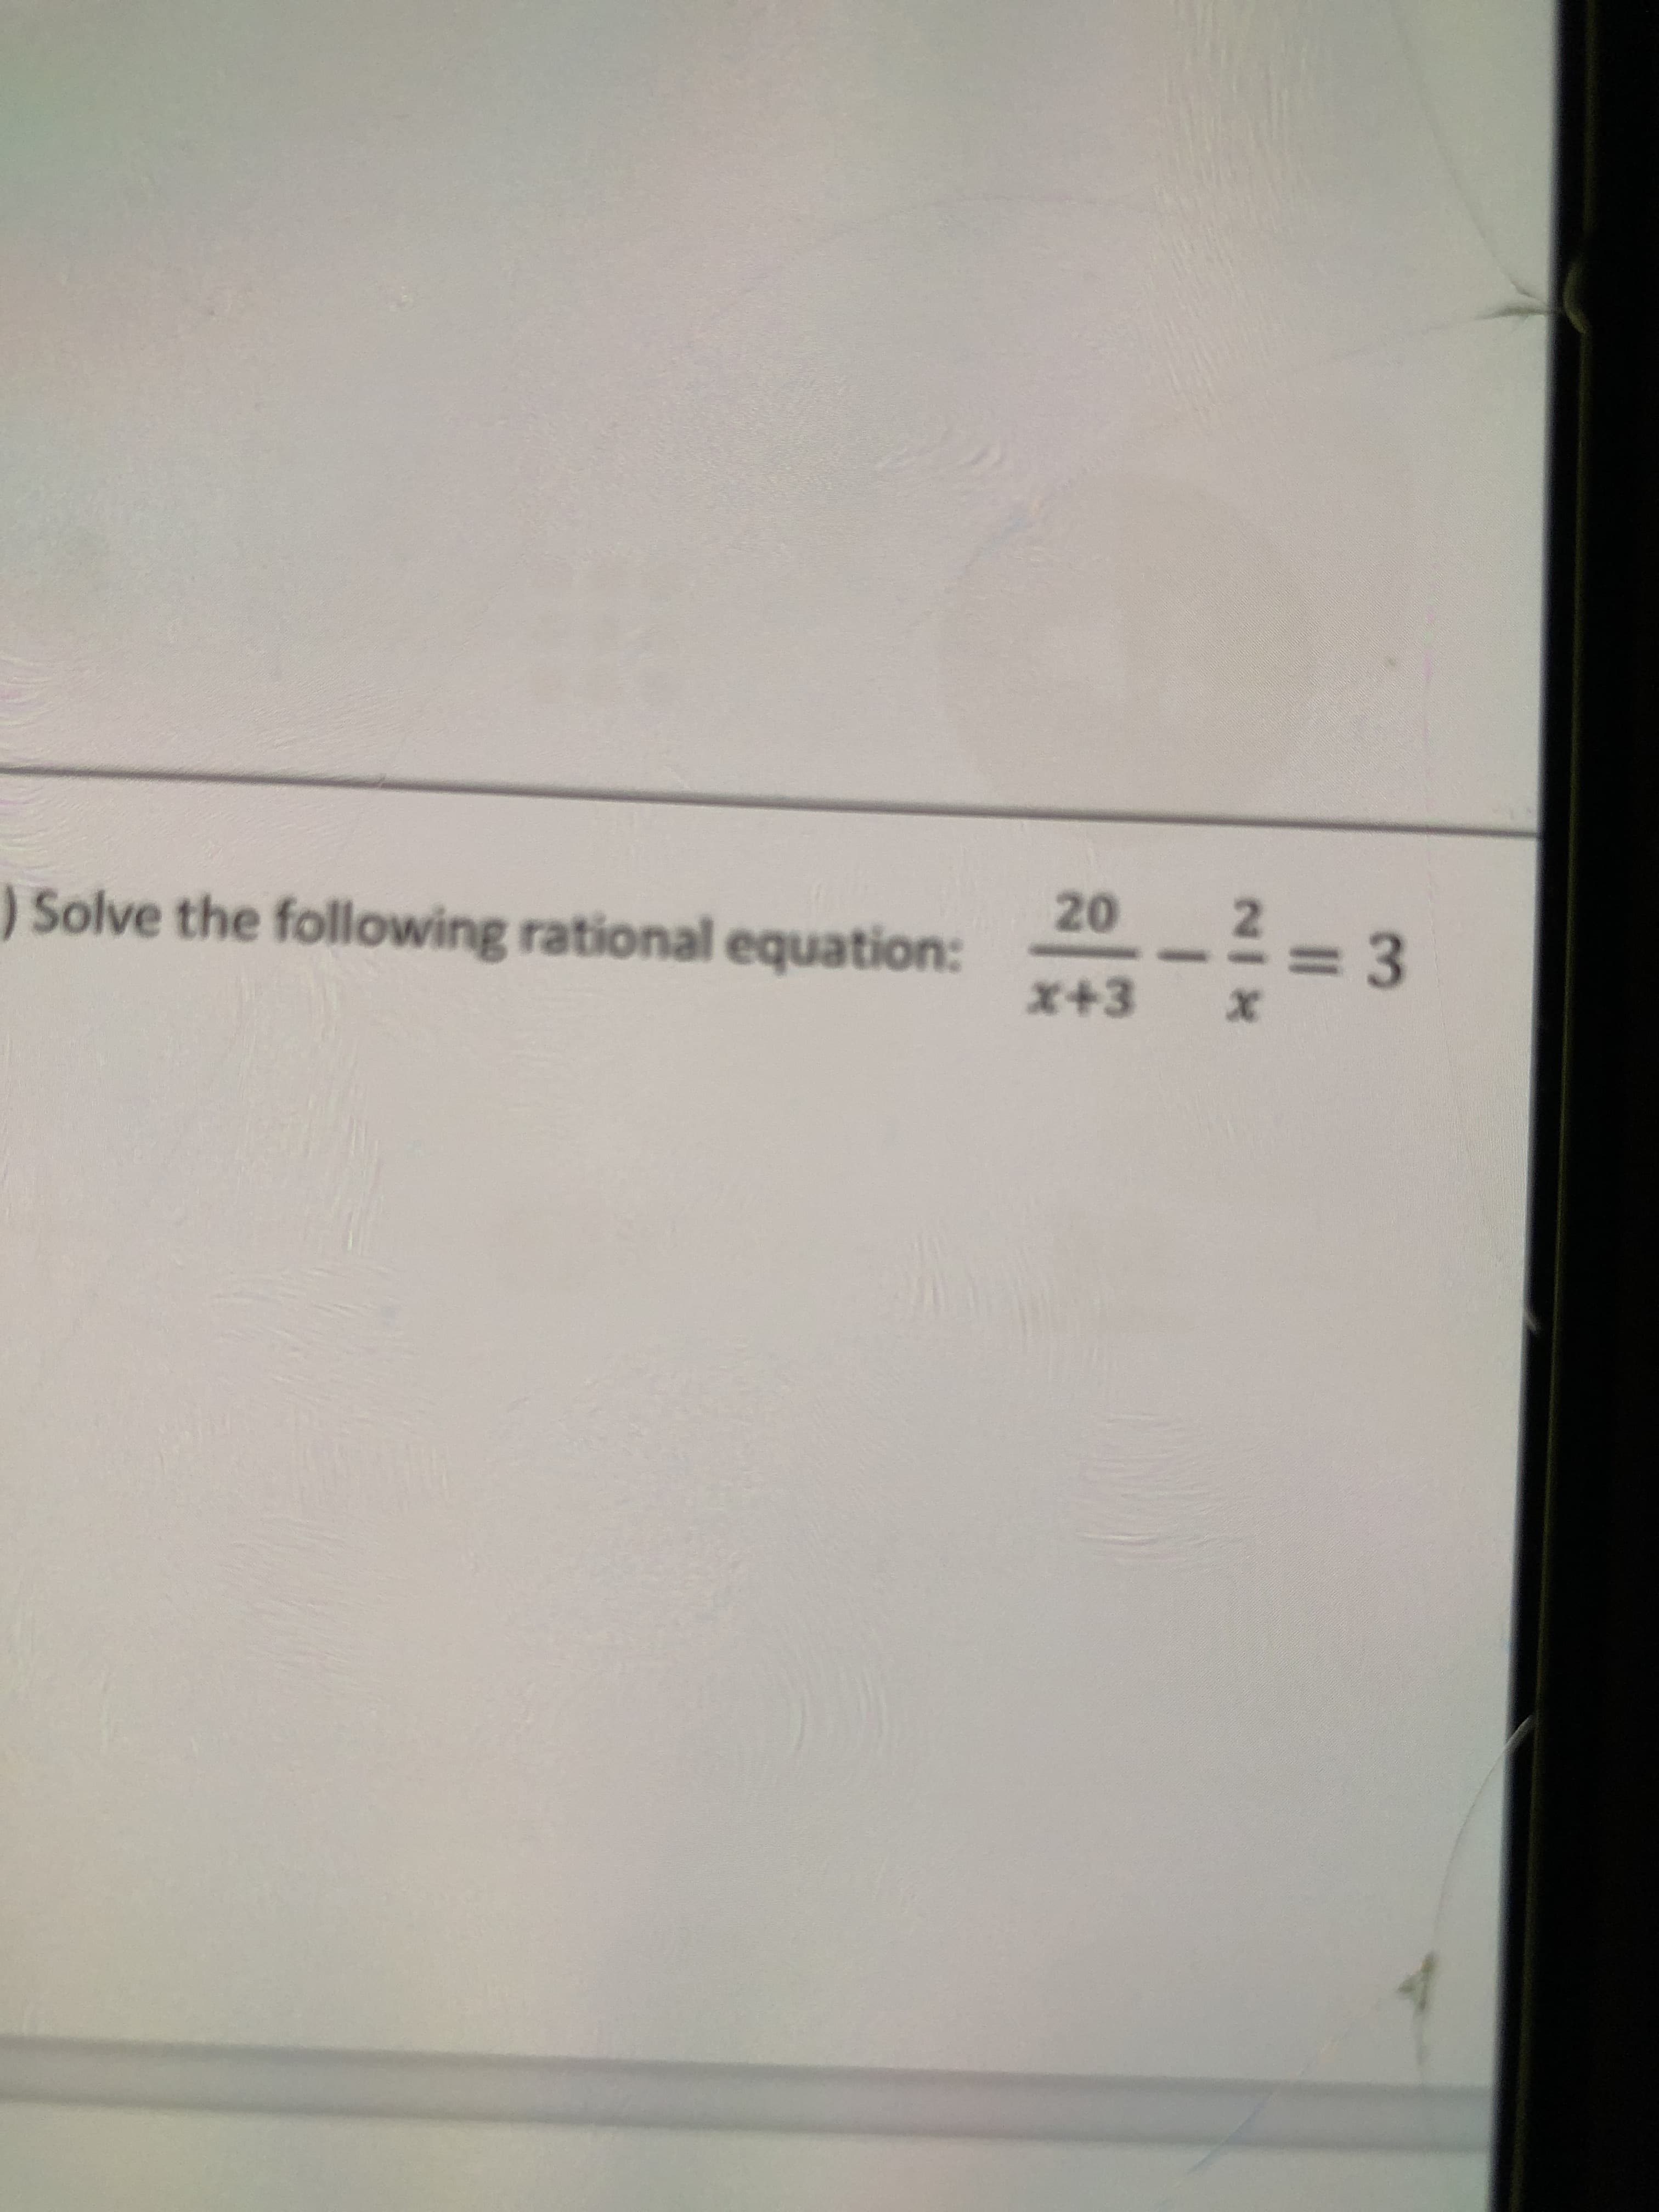 20
) Solve the following rational equation:
= 3
x+3
2/X
